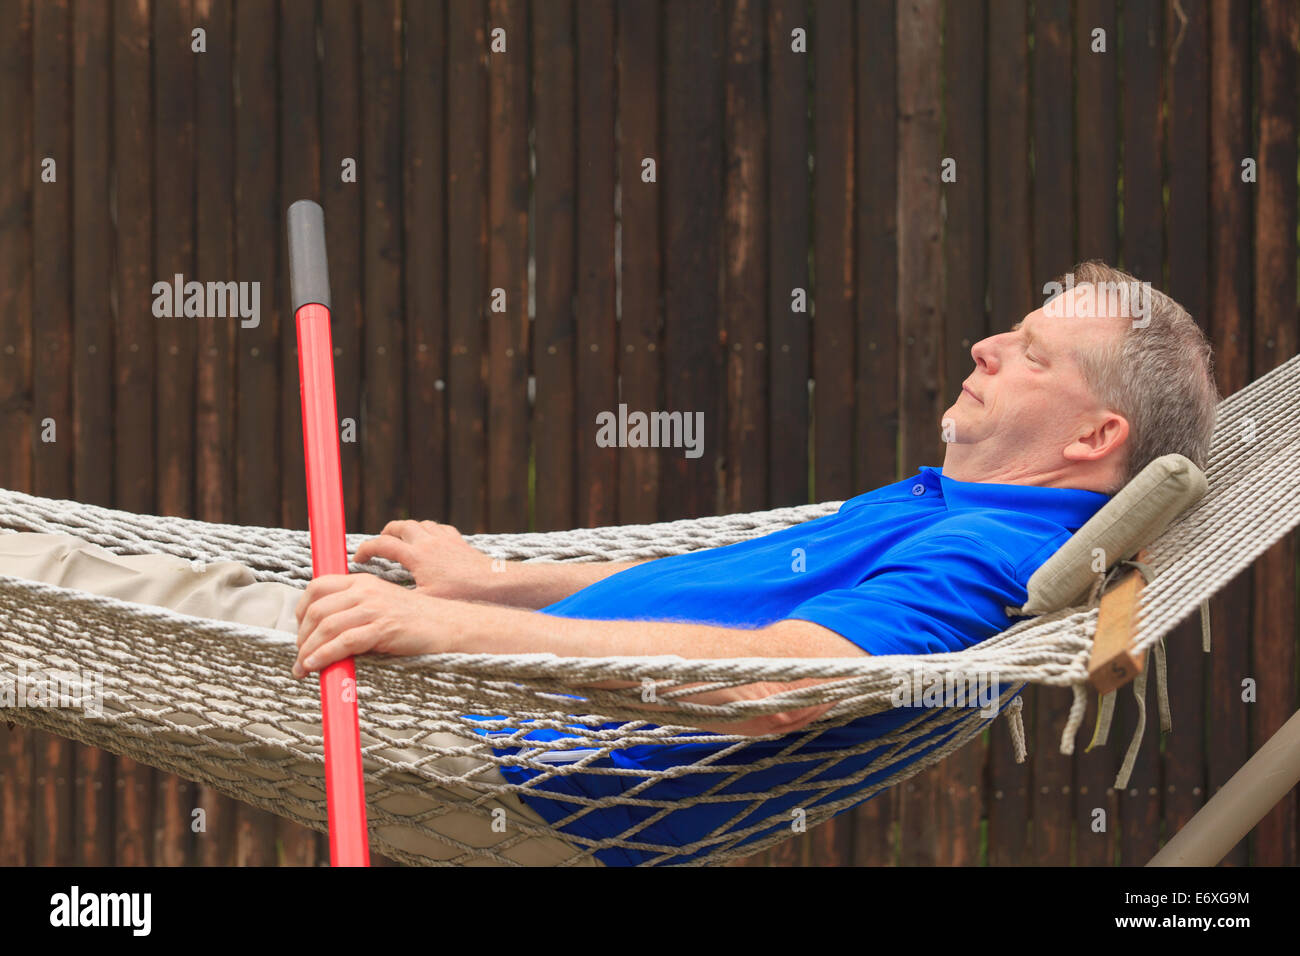 Man with Cerebral Palsy and dyslexia relaxing in his hammock Stock Photo